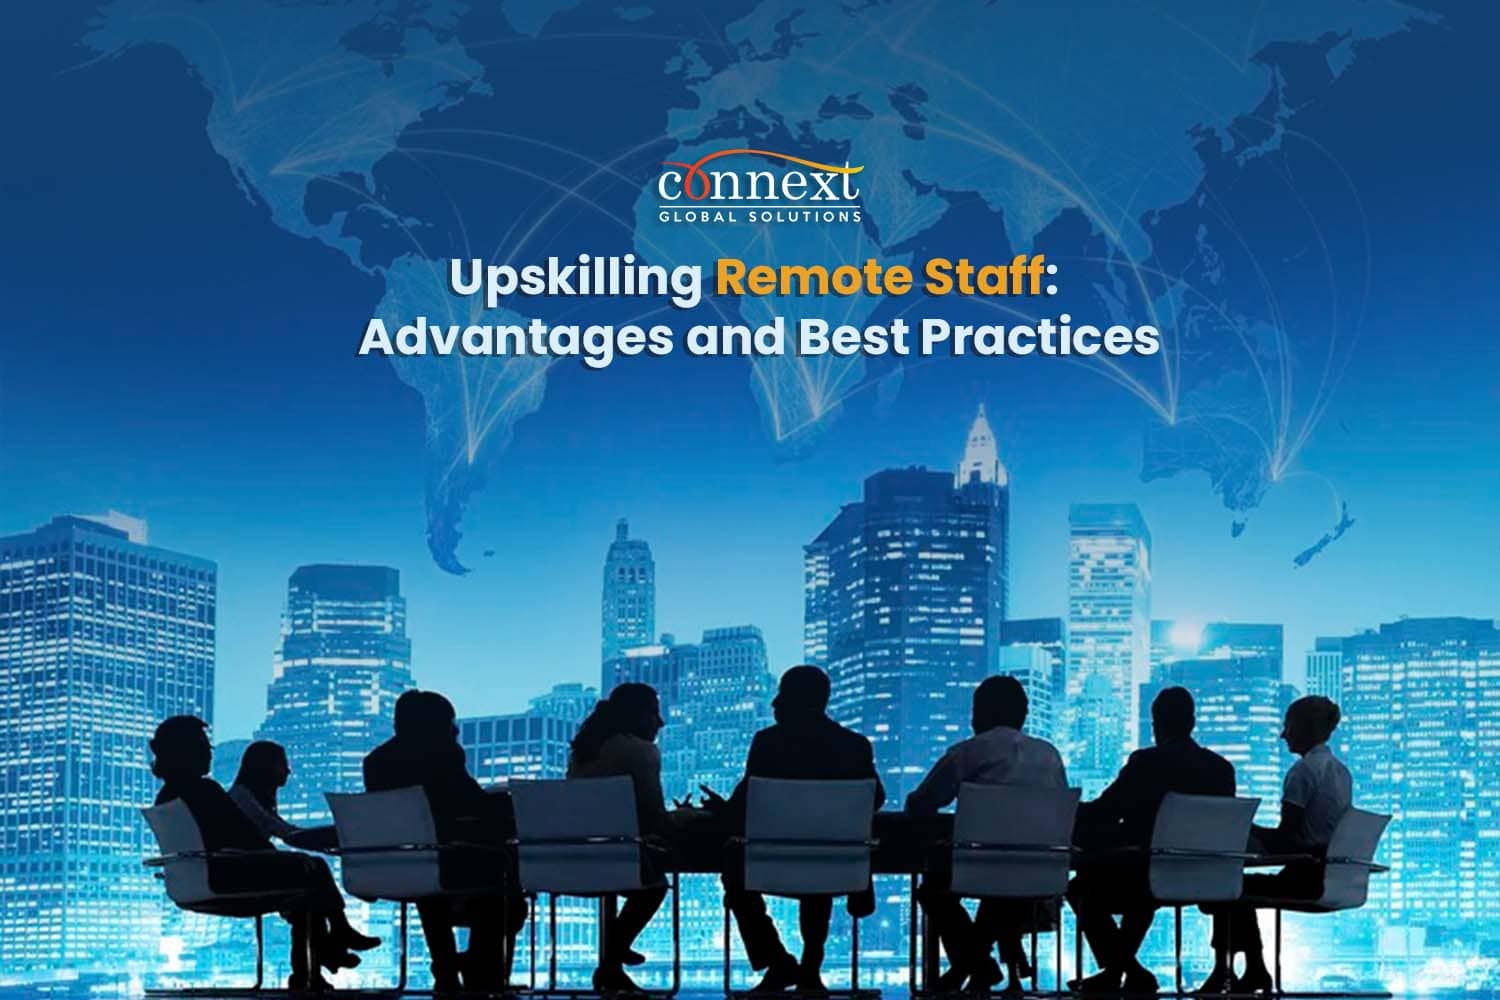 Upskilling Remote Staff: Advantages and Best Practices